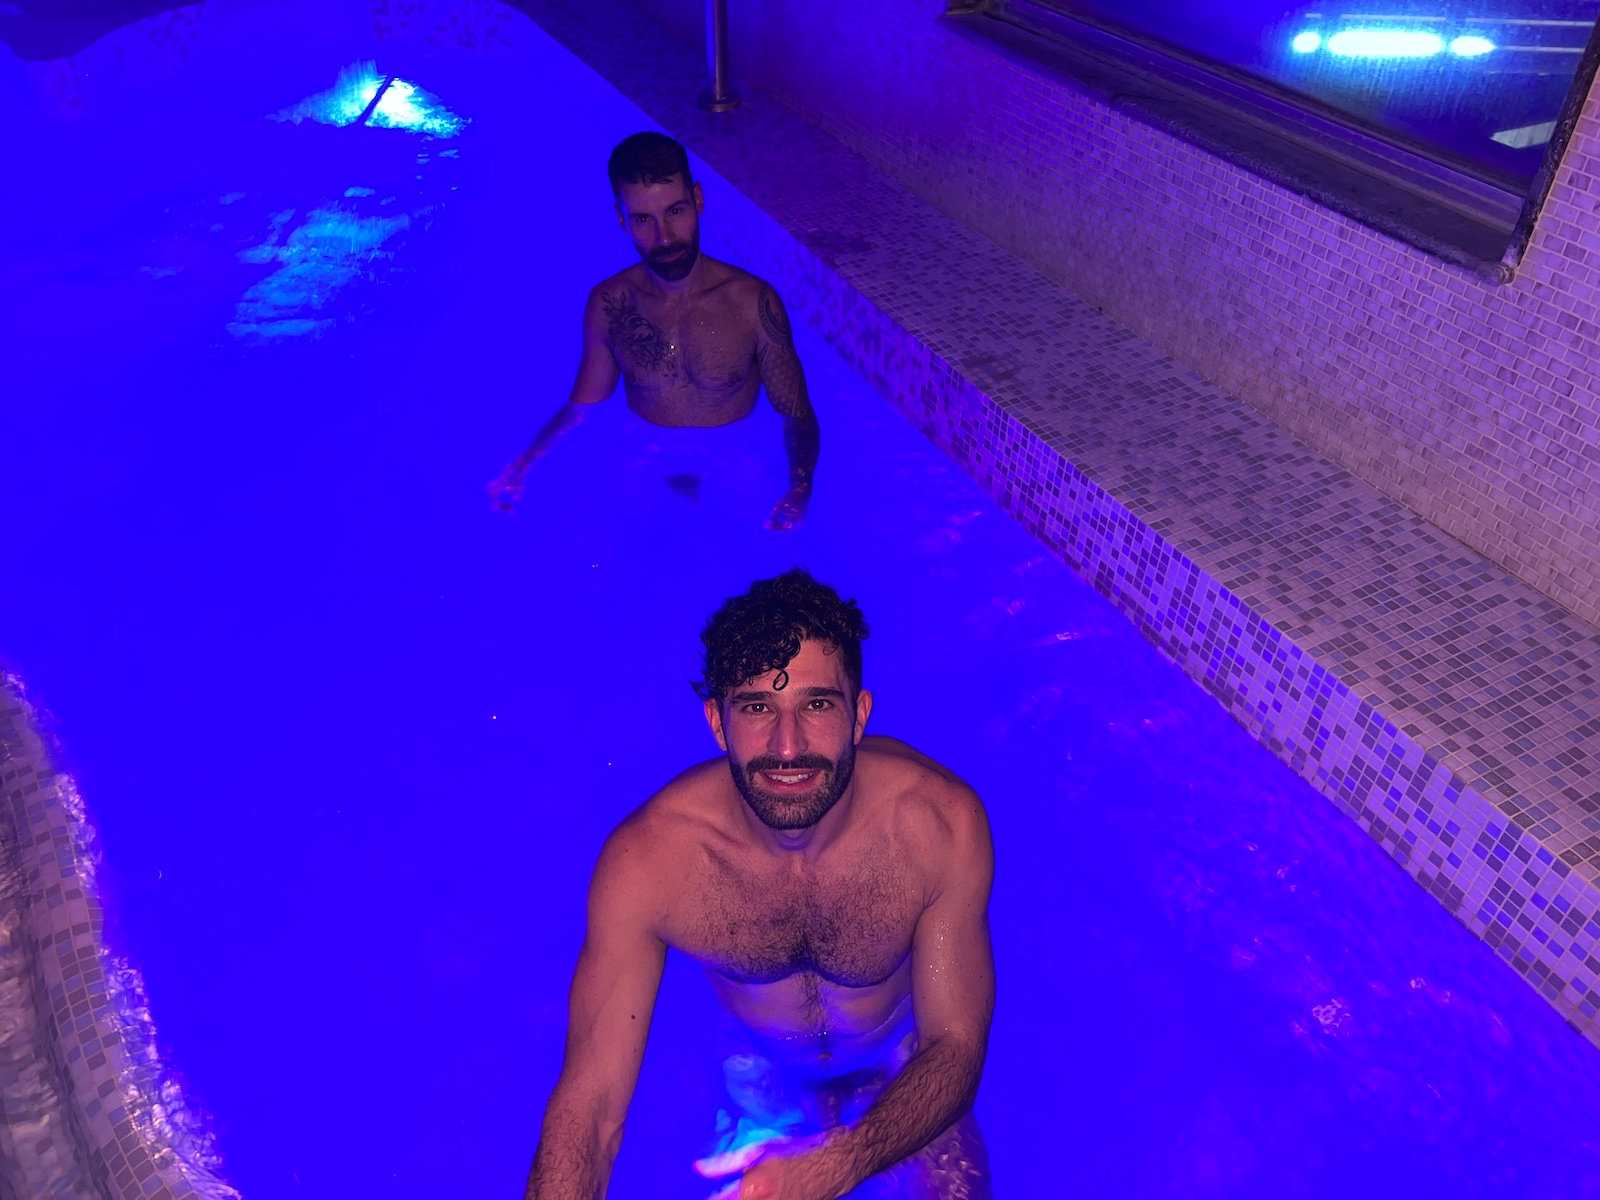 Stef and Seby at the Fenix gay sauna in Milan.